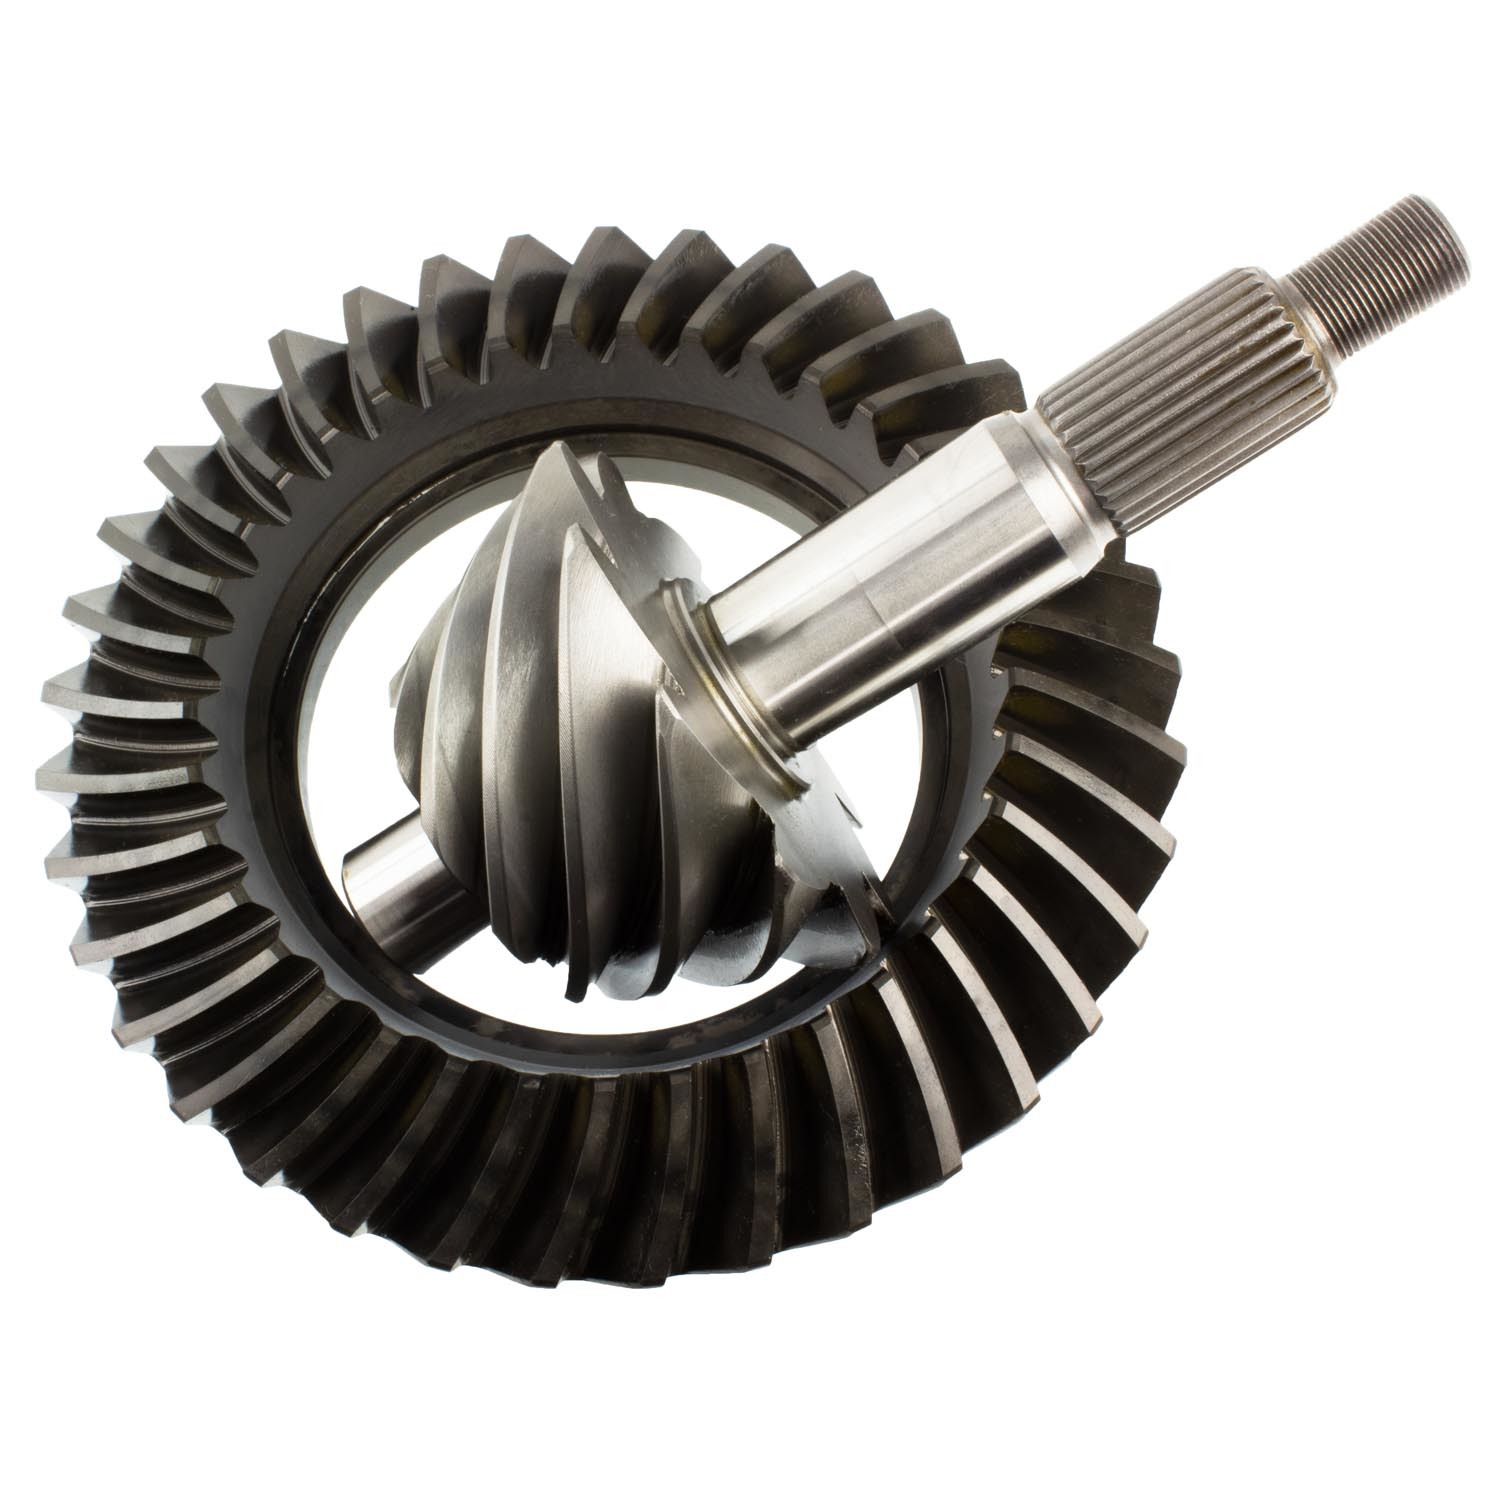 Richmond Gear F9370 - Ring and Pinion, Excel, 3.70 Ratio, 28 Spline Pinion, Ford 9 in, Kit